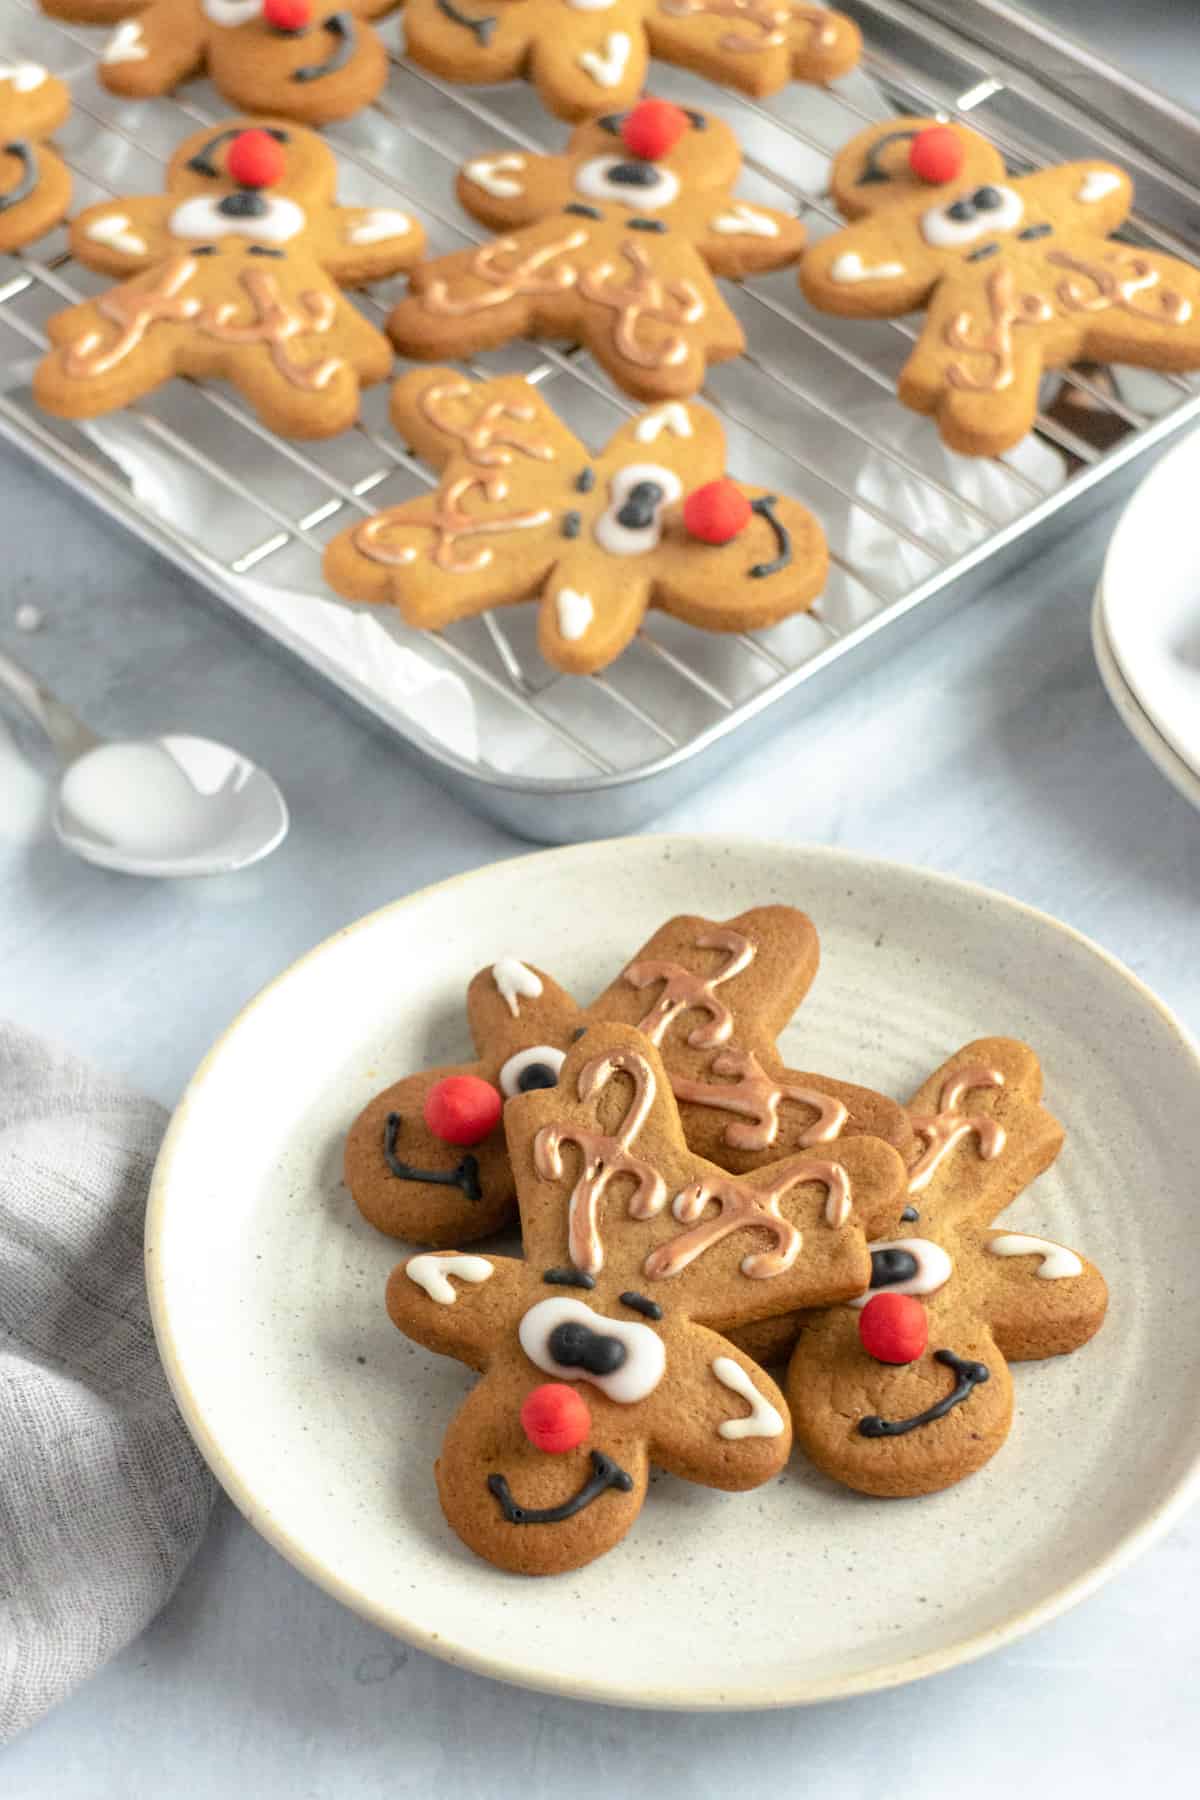 Gingerbread men decorated like reindeer on a plate